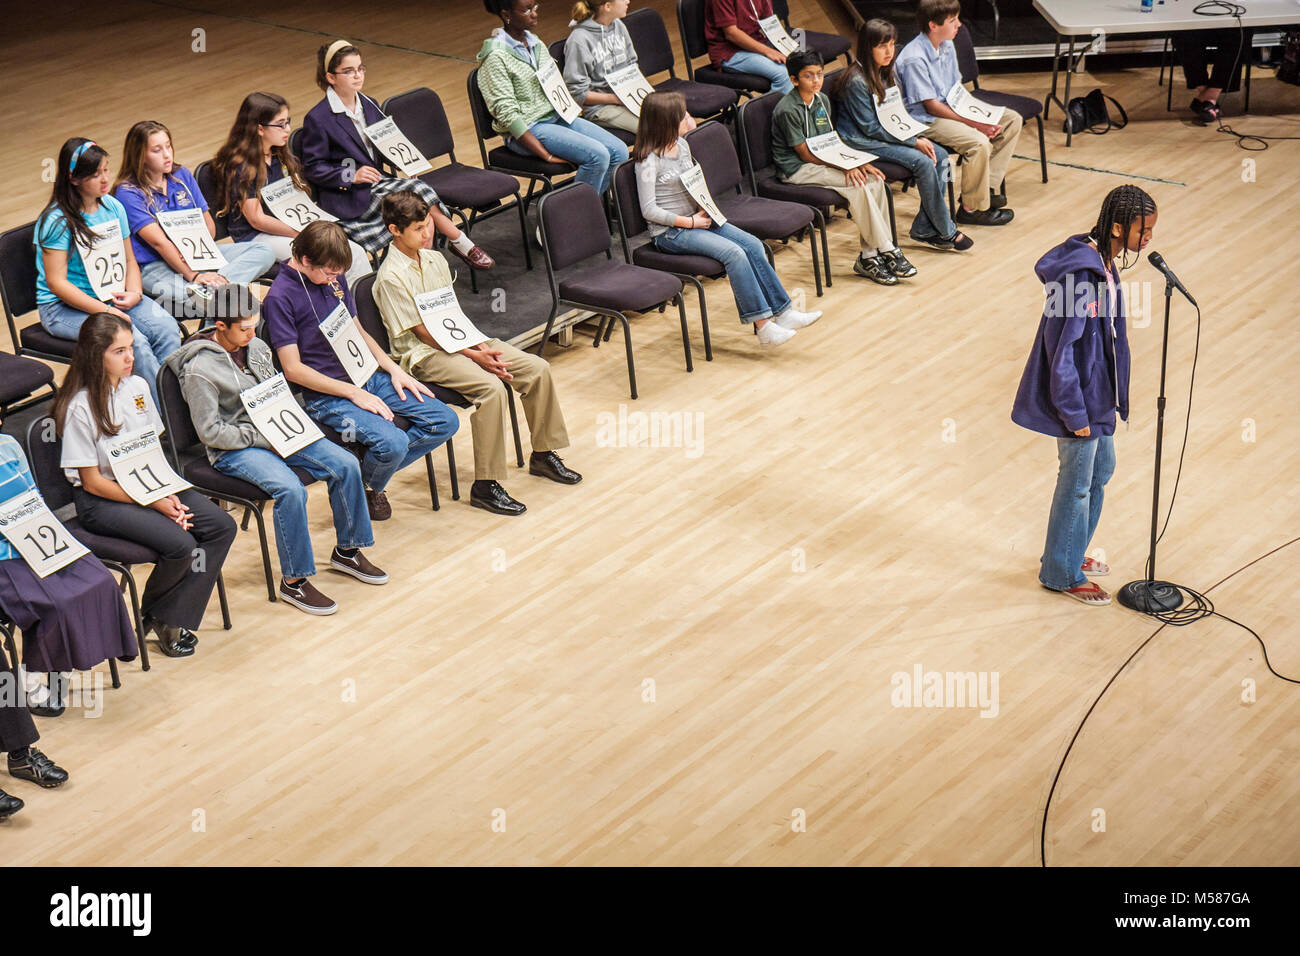 Miami Florida,Arsht Performing Arts Center,The Miami Herald Spelling Bee,test,exam,competition,multicultural,Black African,Hispanic ethnic mix diverse Stock Photo